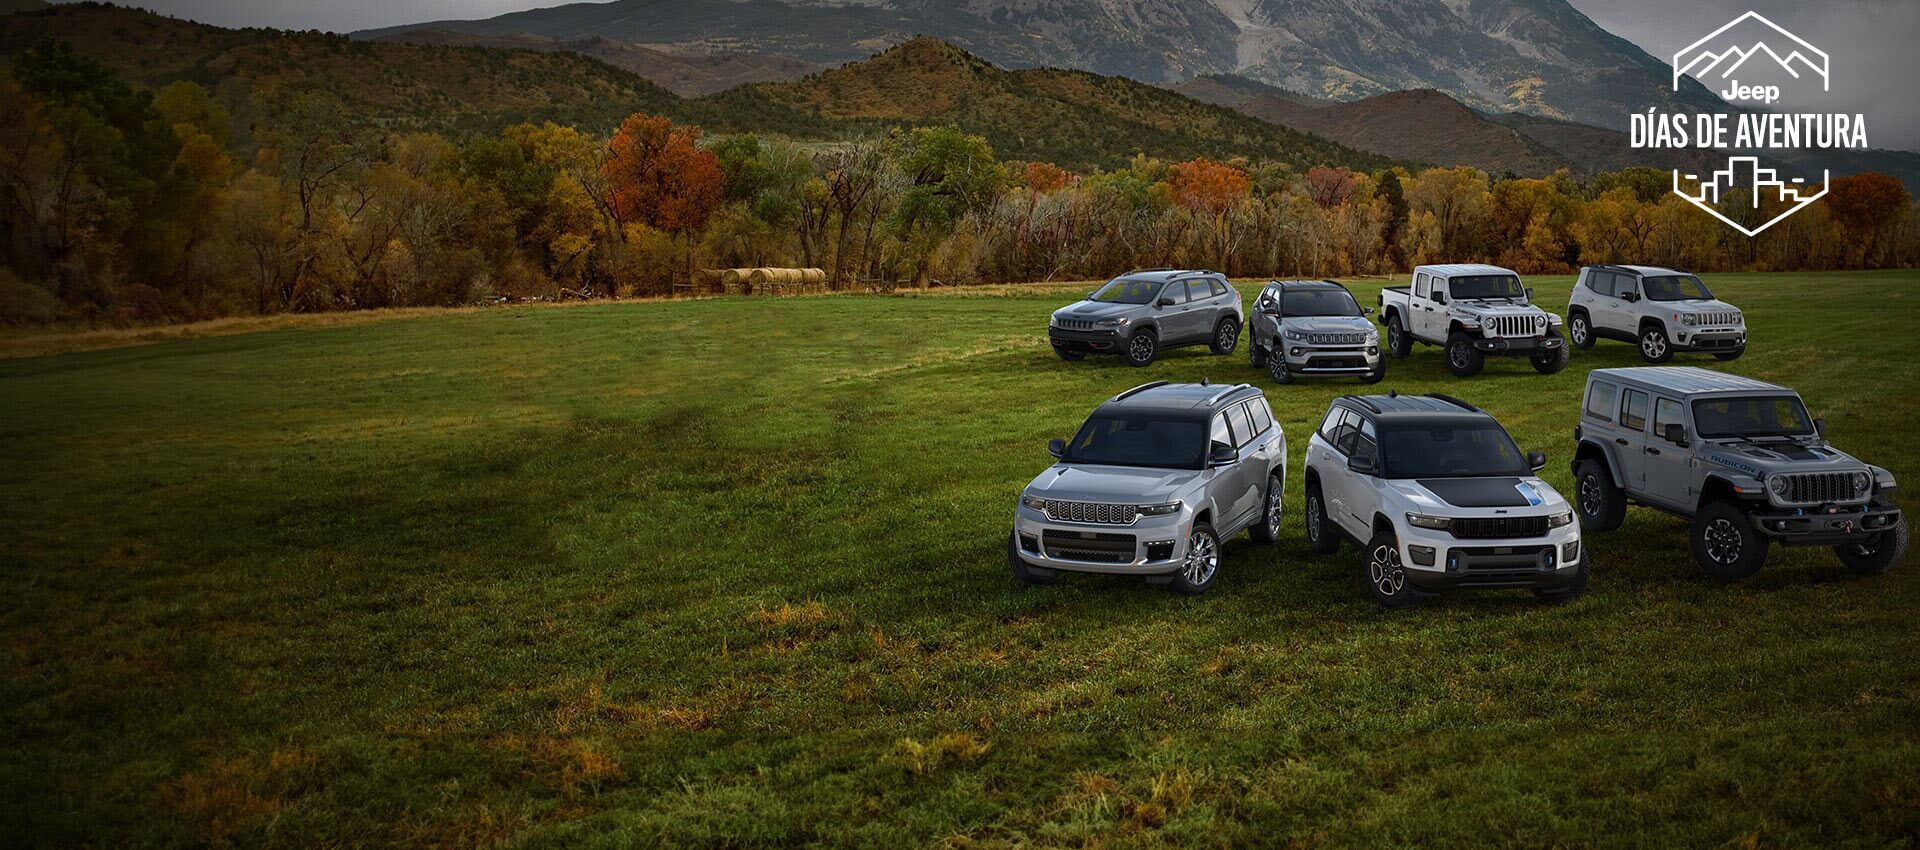 The Jeep Brand lineup parked in two rows on a grassy plain. Beyond is a forest wrapped in autumn leaves and mountains rising in the distance.